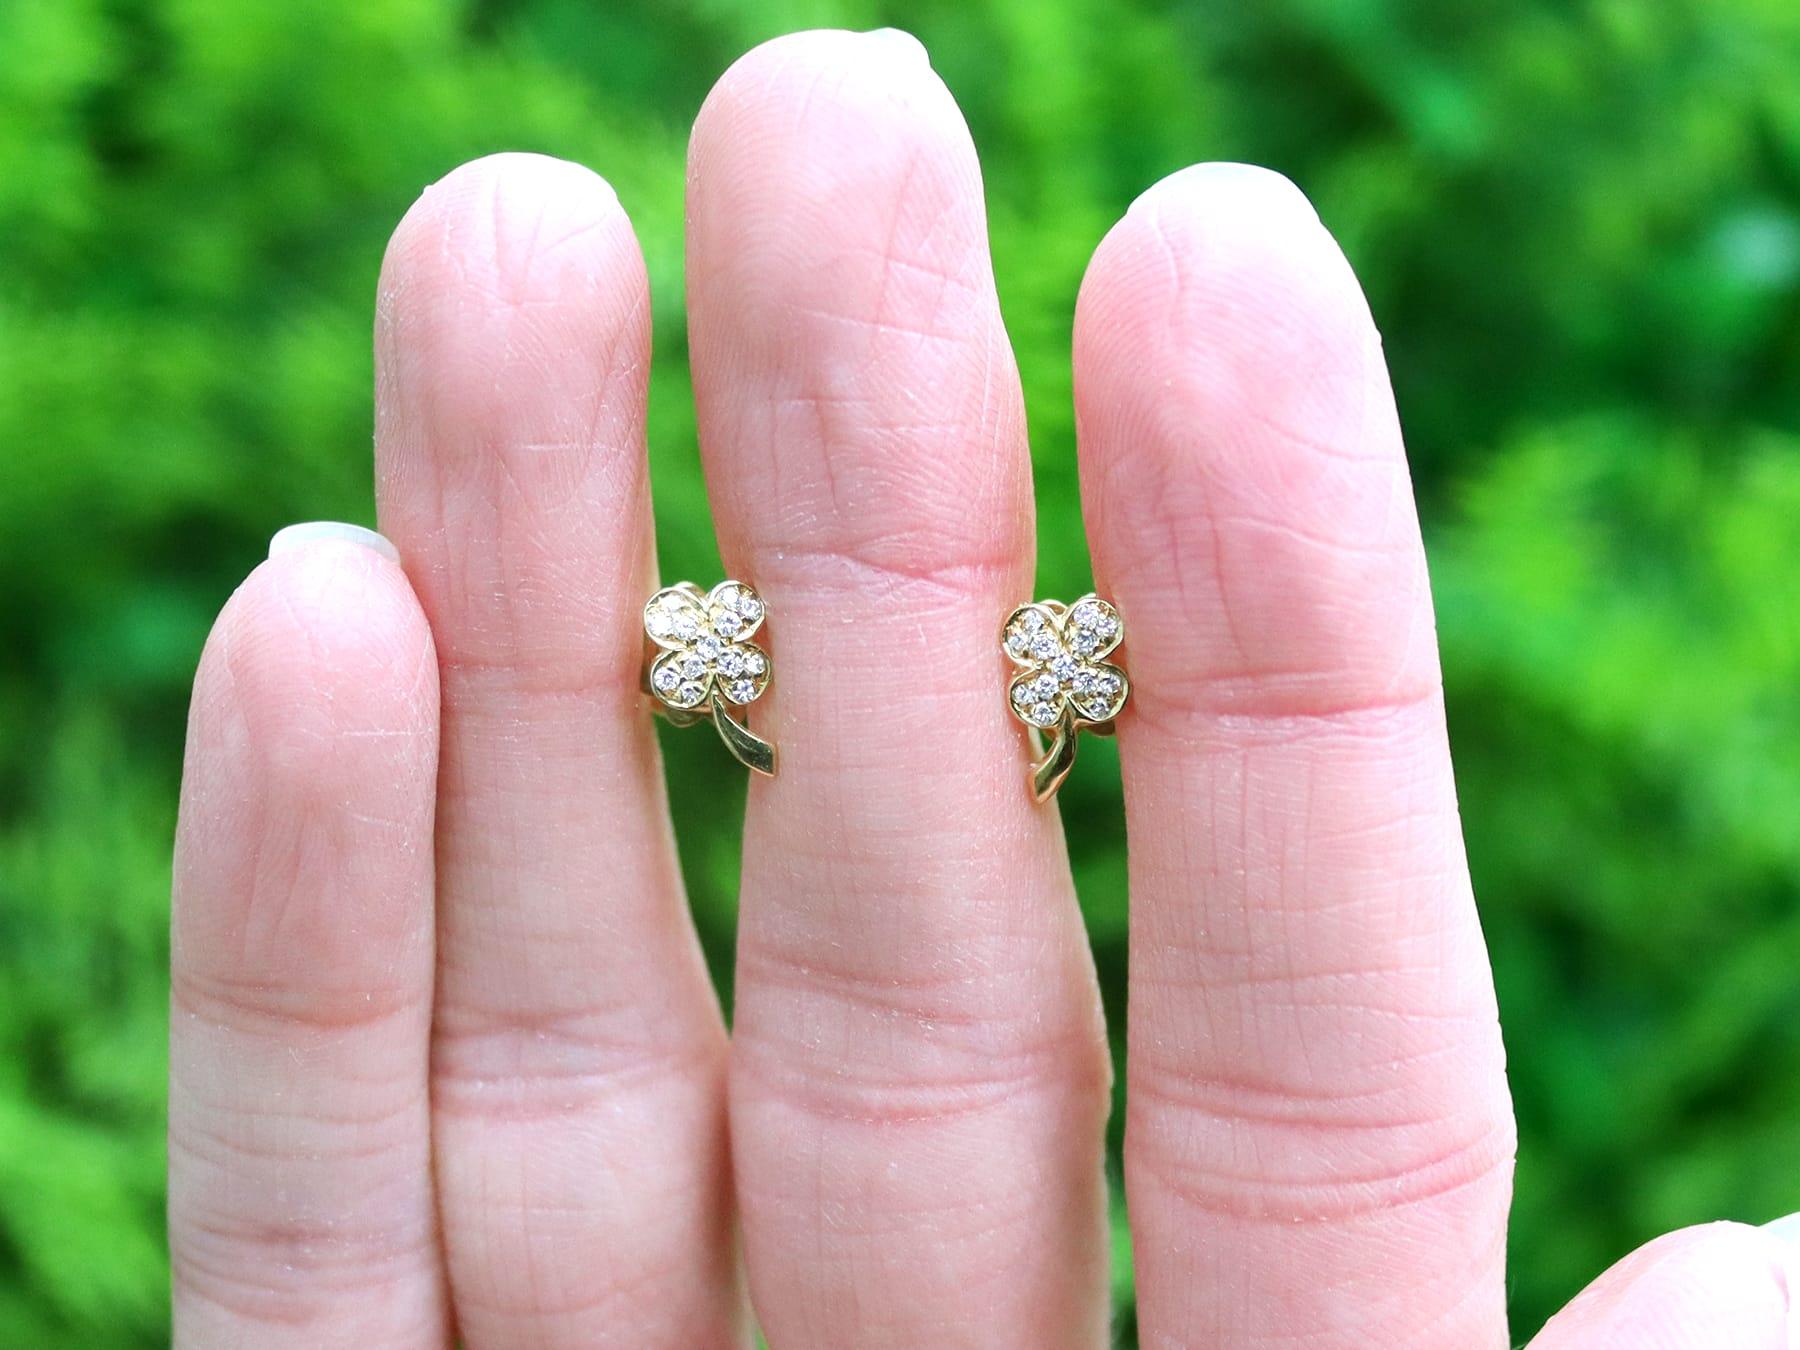 An impressive pair of vintage Italian 0.18 carat diamond and 18 karat yellow gold 'clover' stud earrings; part of our diverse vintage jewelry and estate jewelry collections.

These fine and impressive vintage diamond earrings have been crafted in